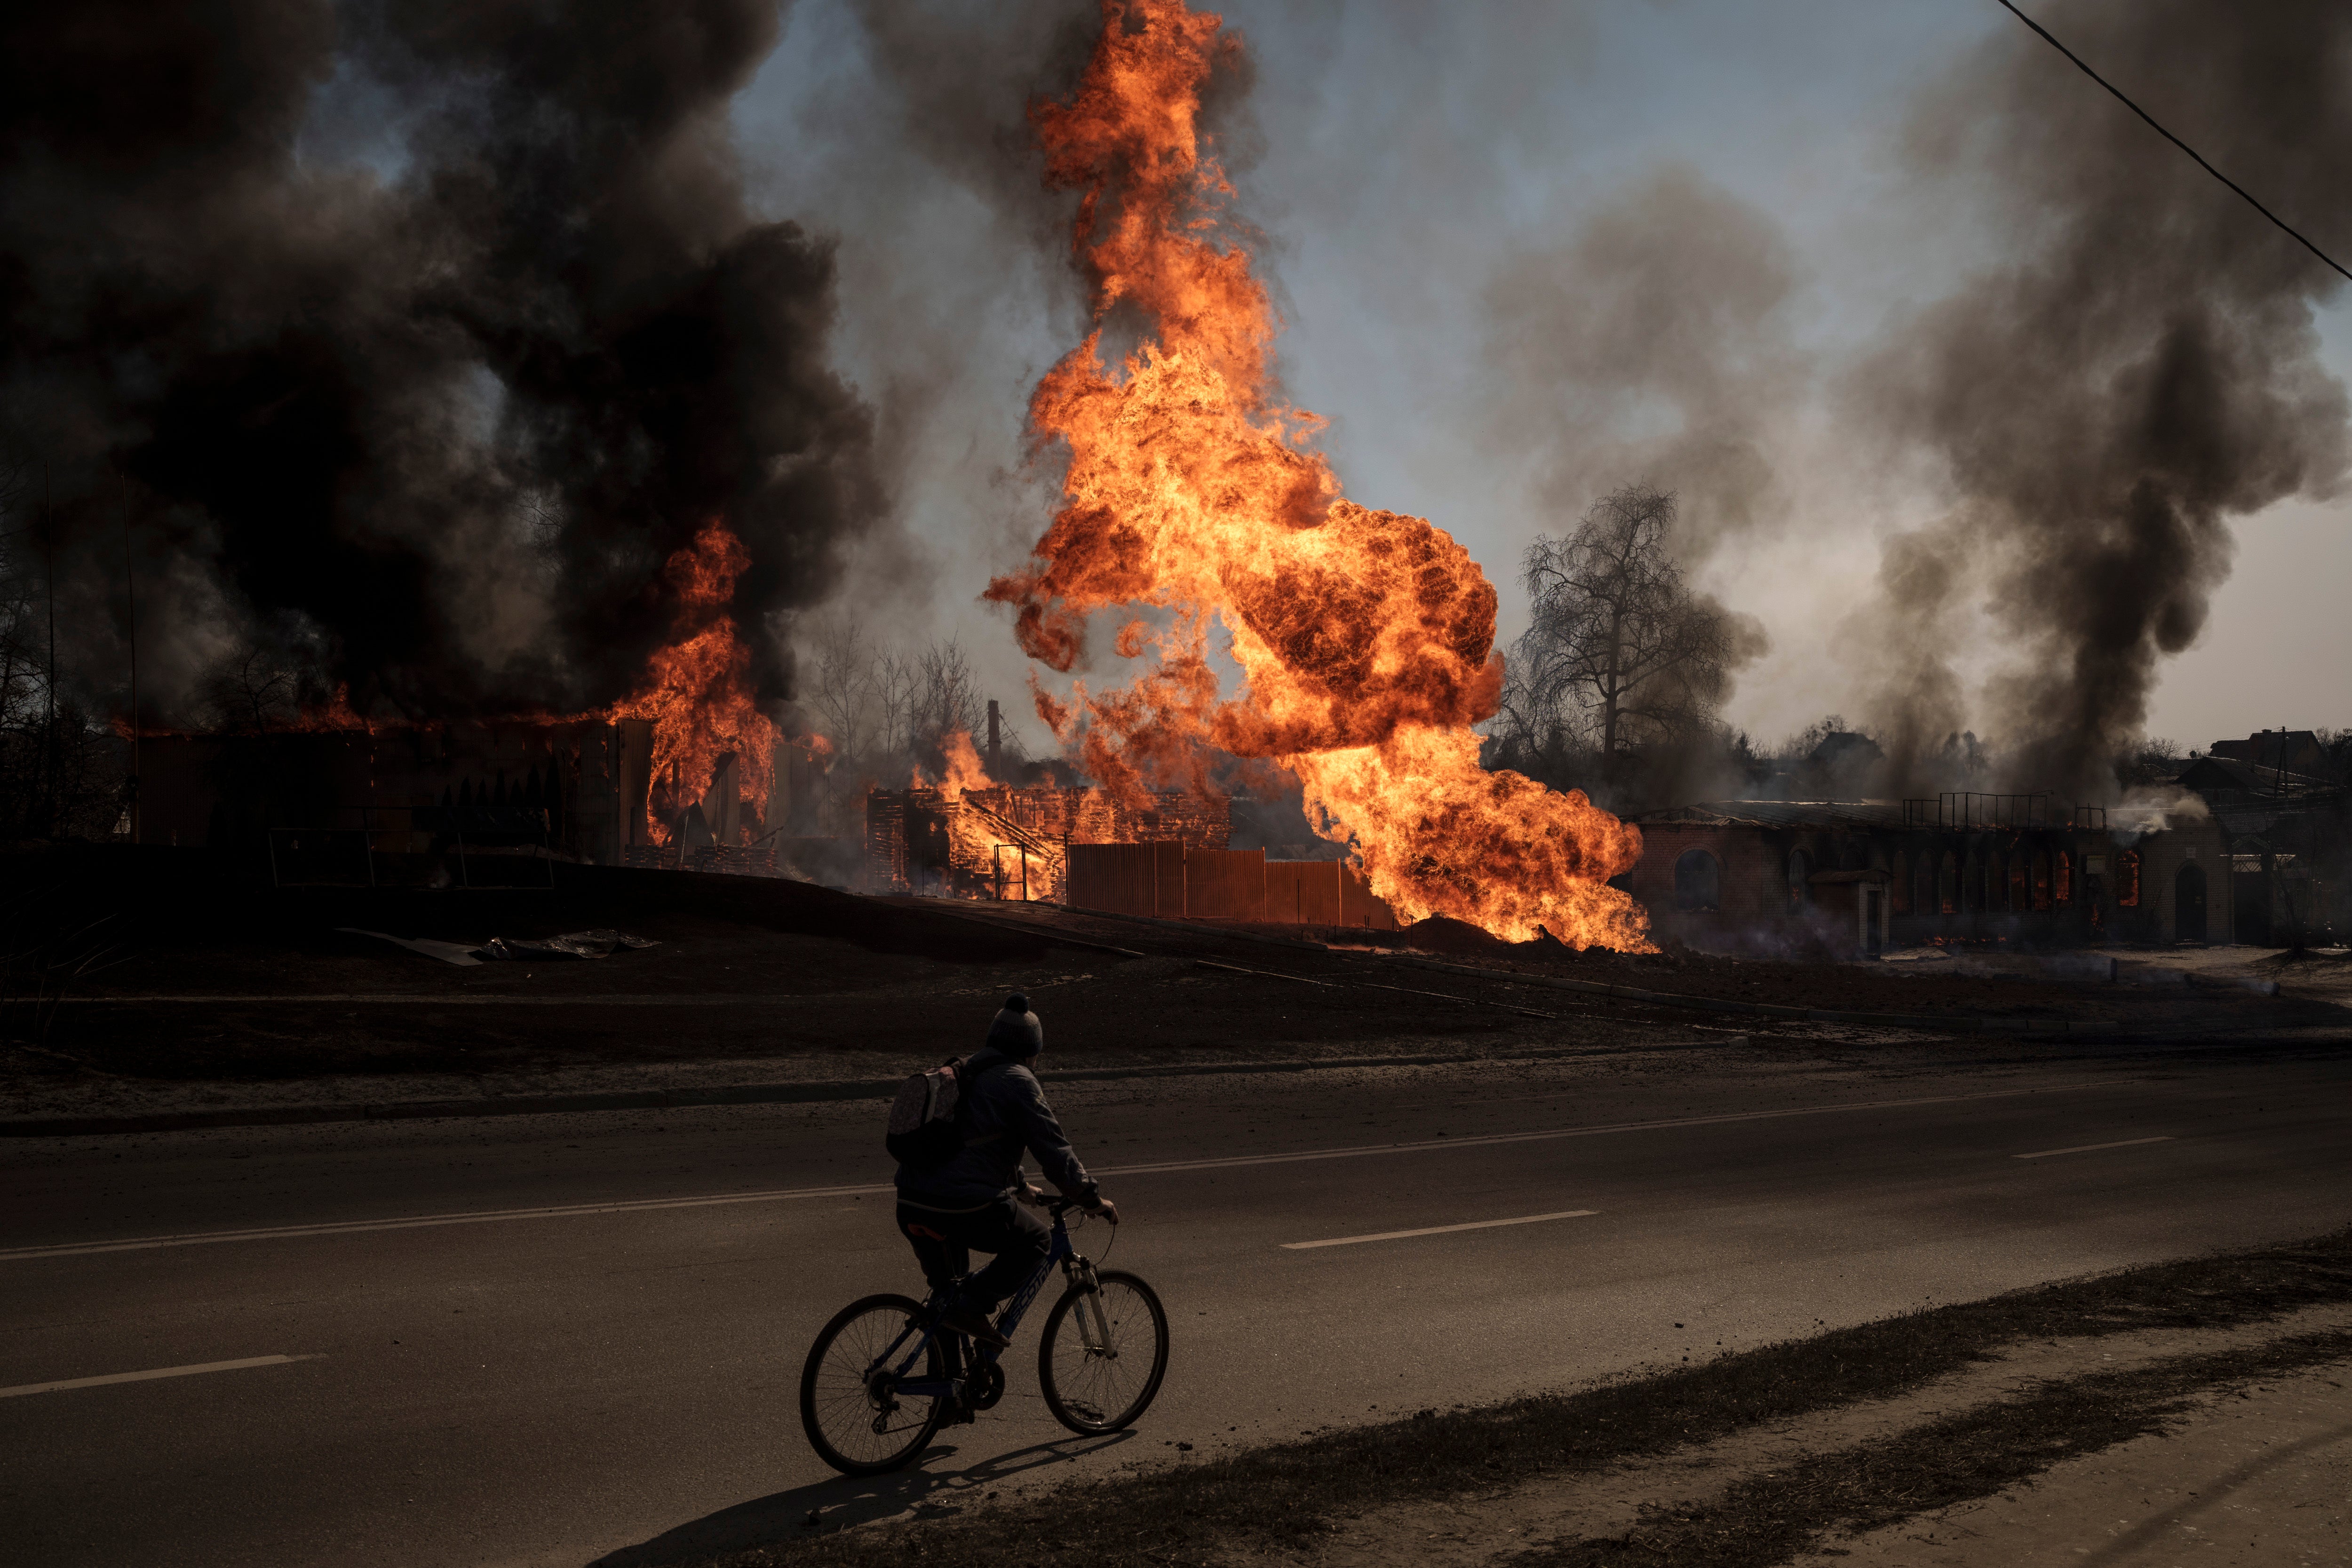 A man cycles past flames after a Russian attack in Kharkiv on 25 March, 2022.